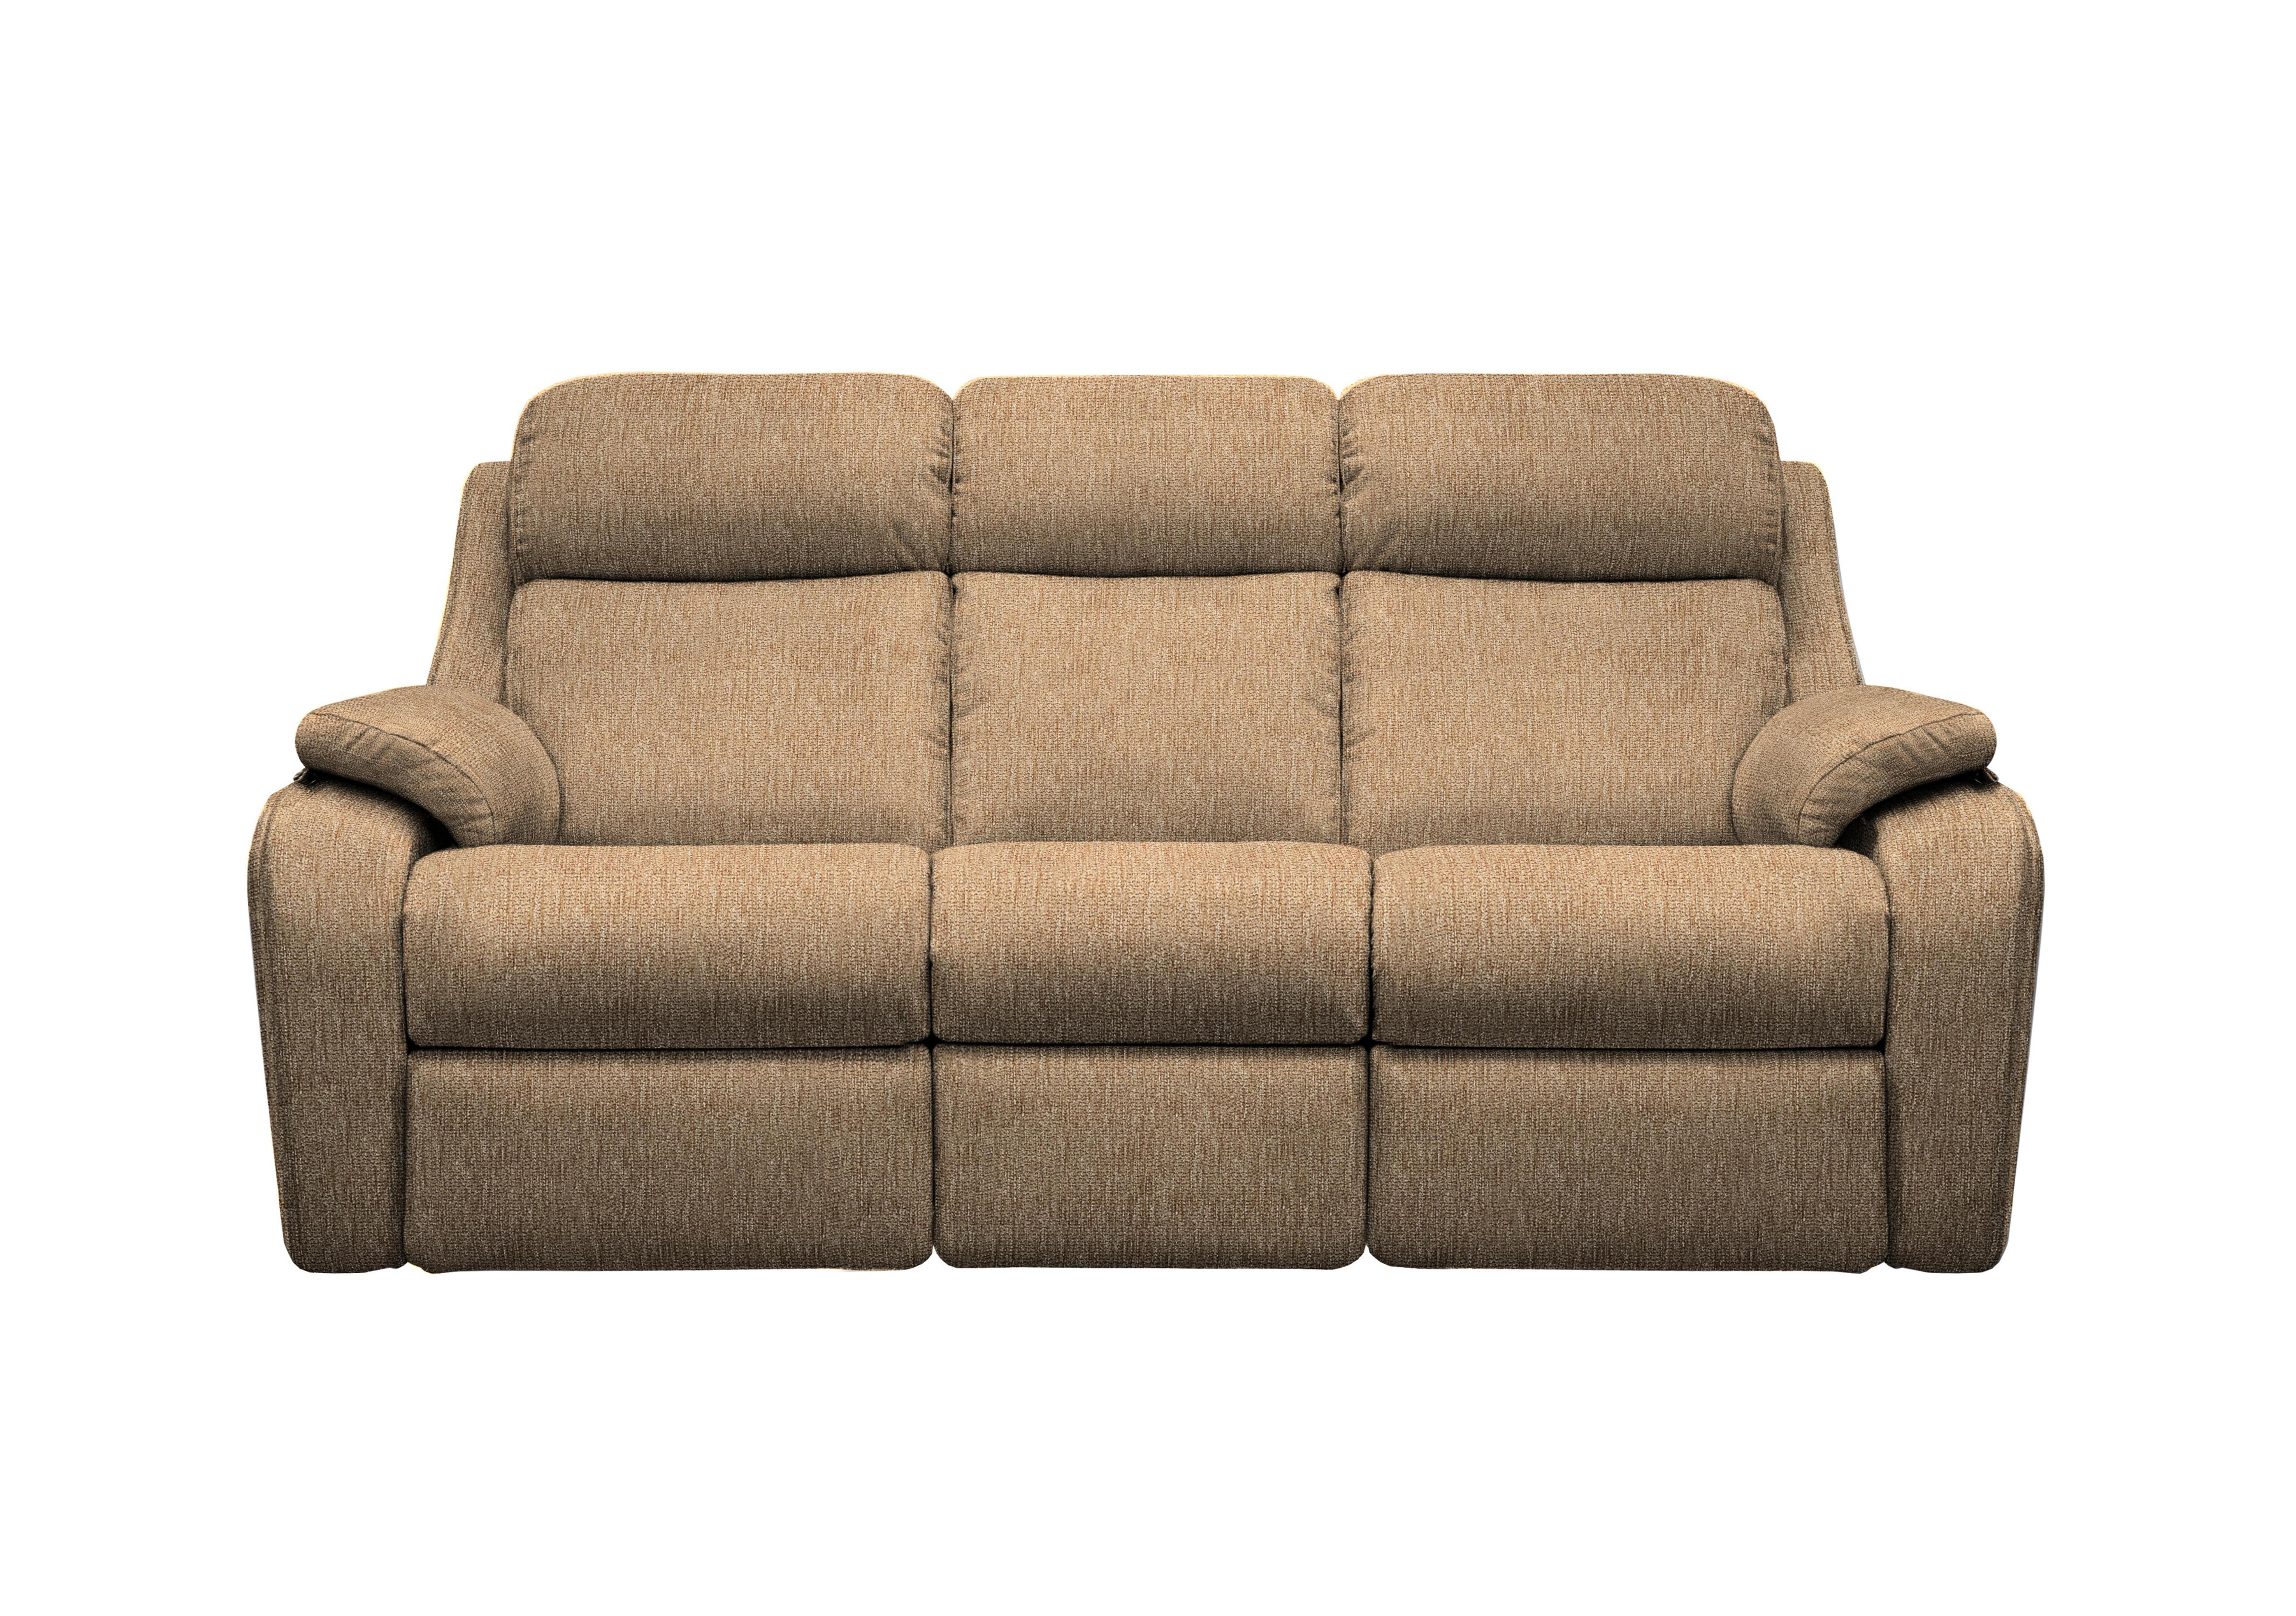 Kingsbury 3 Seater Fabric Sofa in A070 Boucle Cocoa on Furniture Village